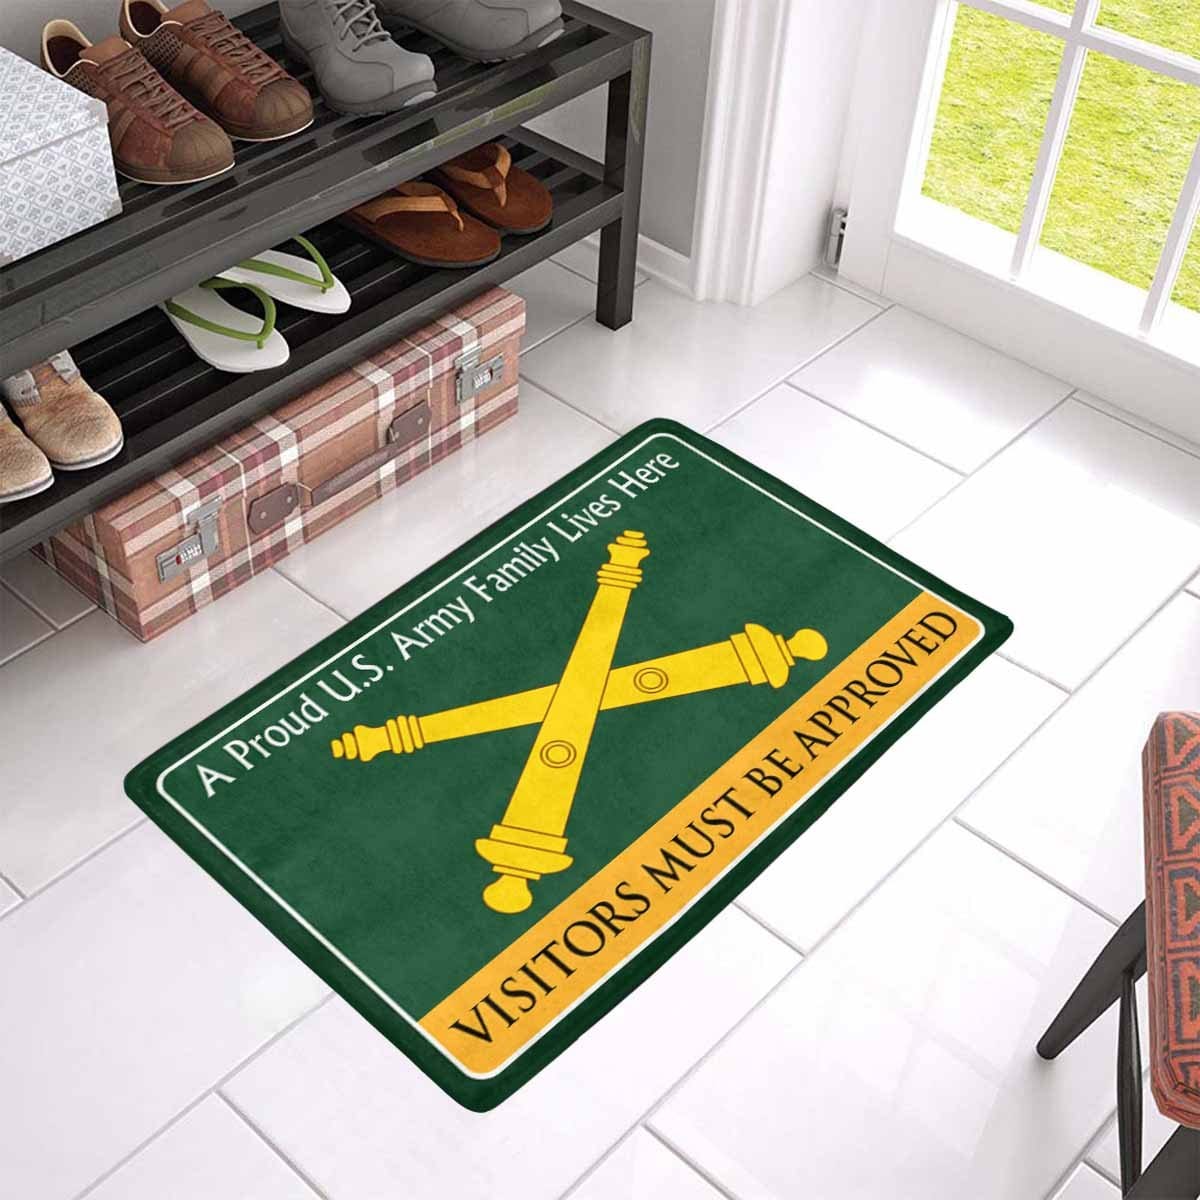 US Army Field Artillery Family Doormat - Visitors must be approved Doormat (23.6 inches x 15.7 inches)-Doormat-Army-Branch-Veterans Nation